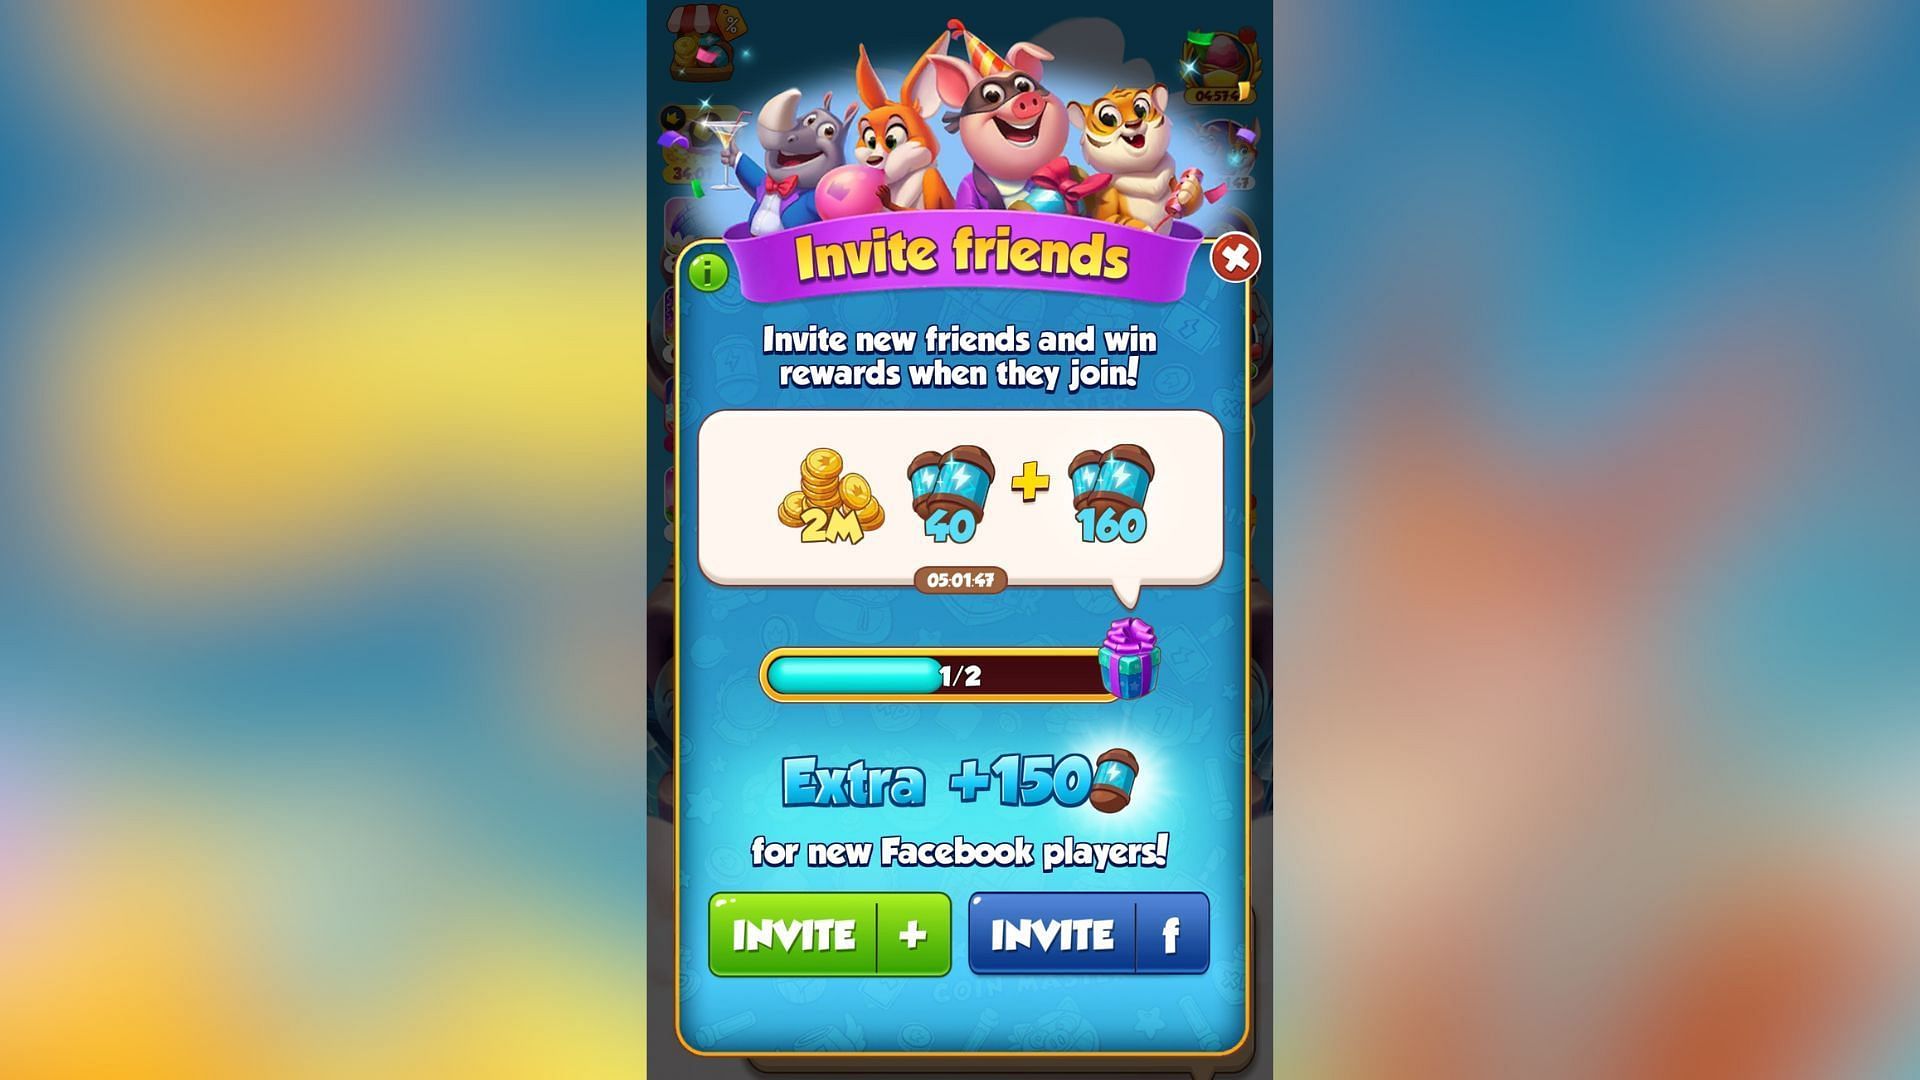 You can get free Spins in Coin Master by inviting new friends to play the app together. (Image via Moon Active)